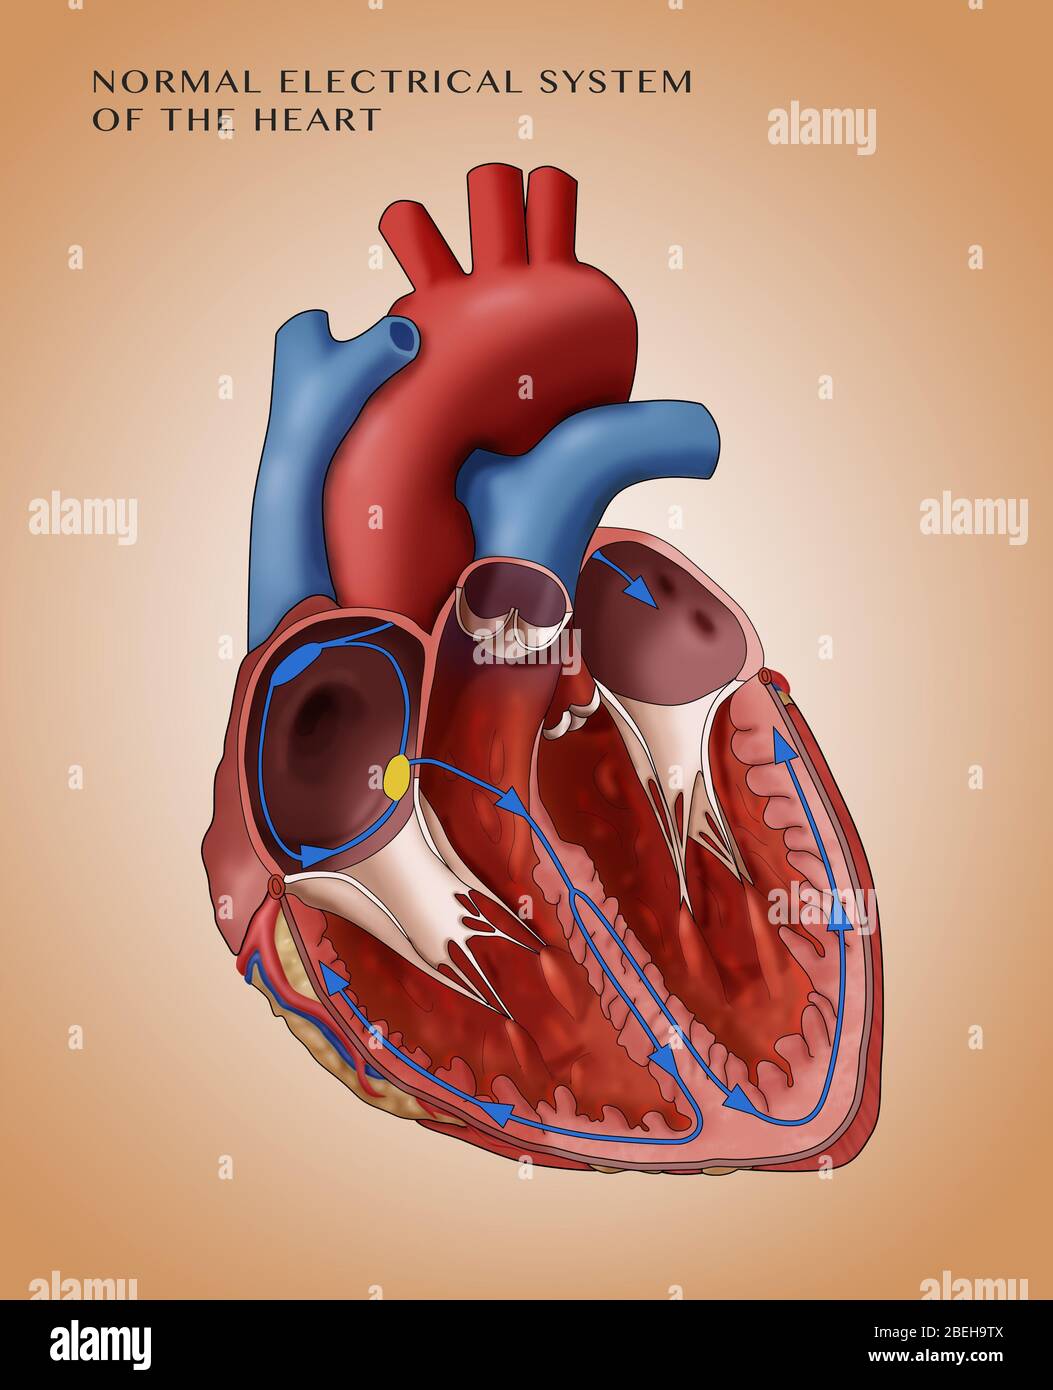 Normal Heart Electrical System, Illustration Stock Photo